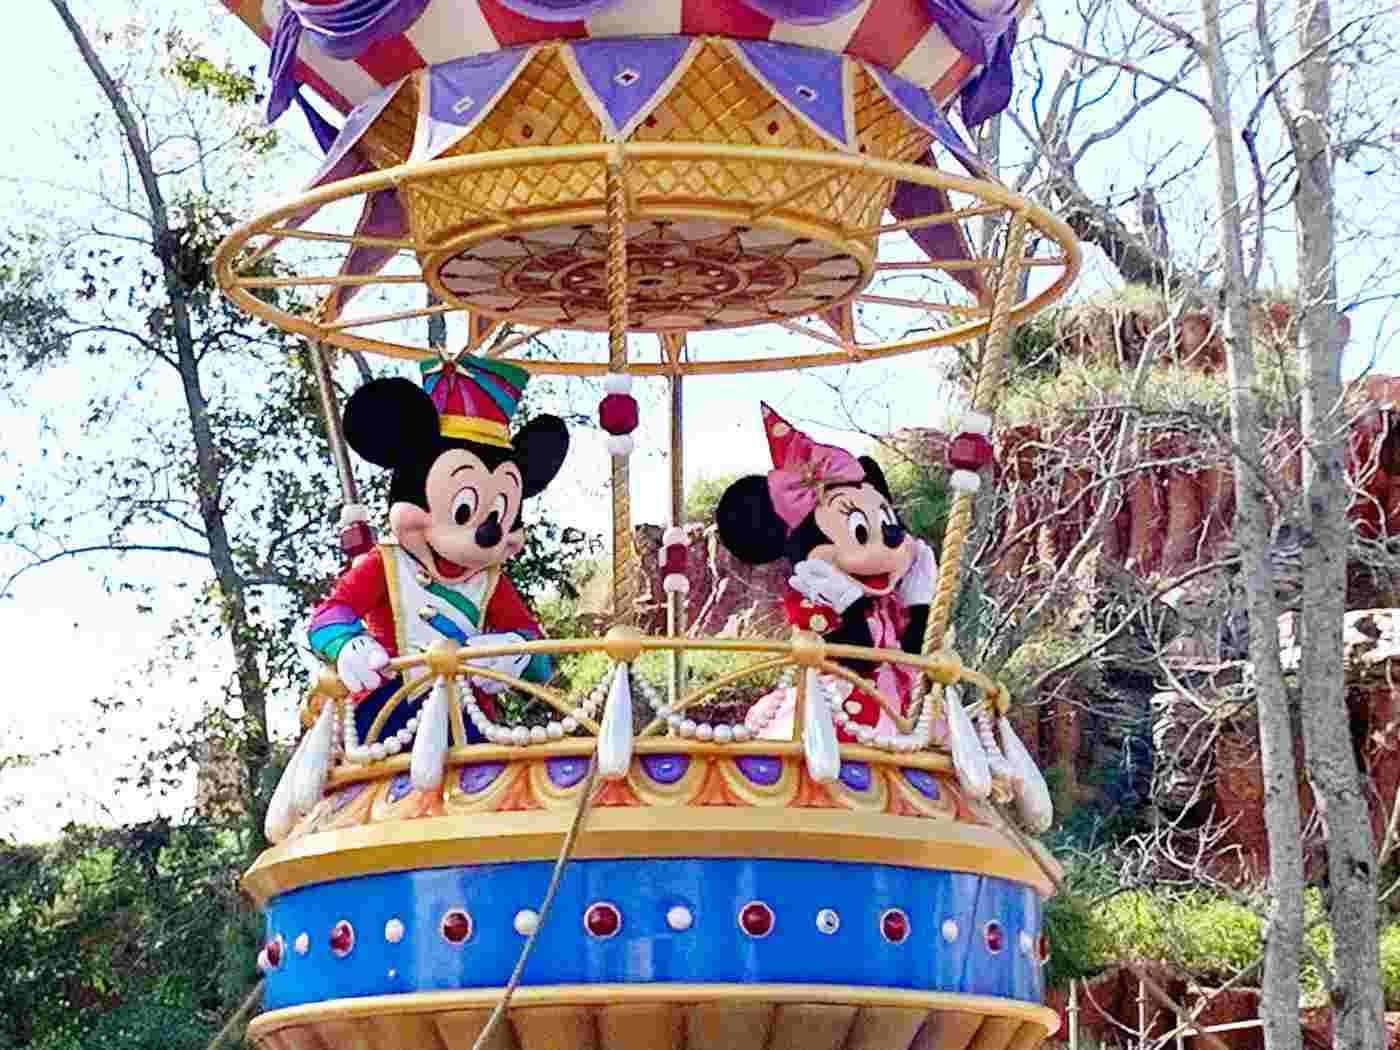 <p>Planning your next trip to Magic Kingdom? </p> <p>Let’s walk through the best Genie+ rides to fast-track your adventure. With 22 options available, picking the top experiences can be tough, but I’ve got you covered. </p> <p>Whether you crave thrilling descents or enchanting journeys, this list highlights the must-do rides that make every moment magical. Ready to find out which attractions are worth your Genie+ pick? </p>